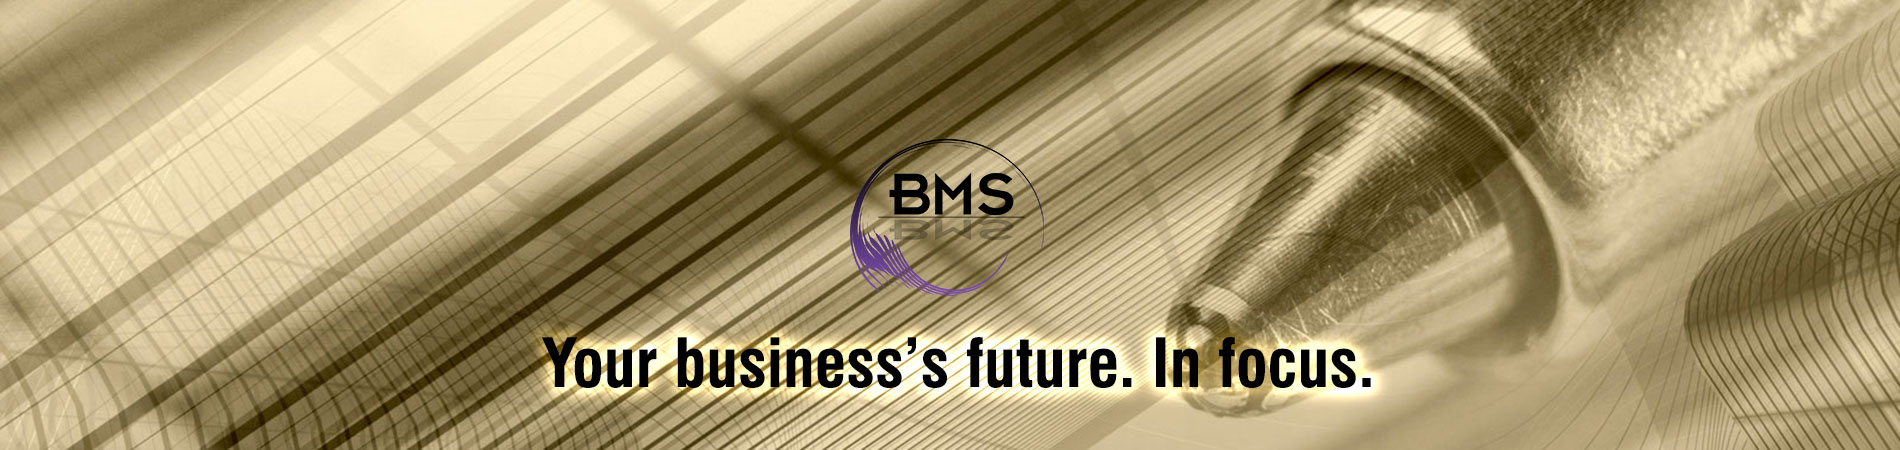 Your business’s future. In focus.